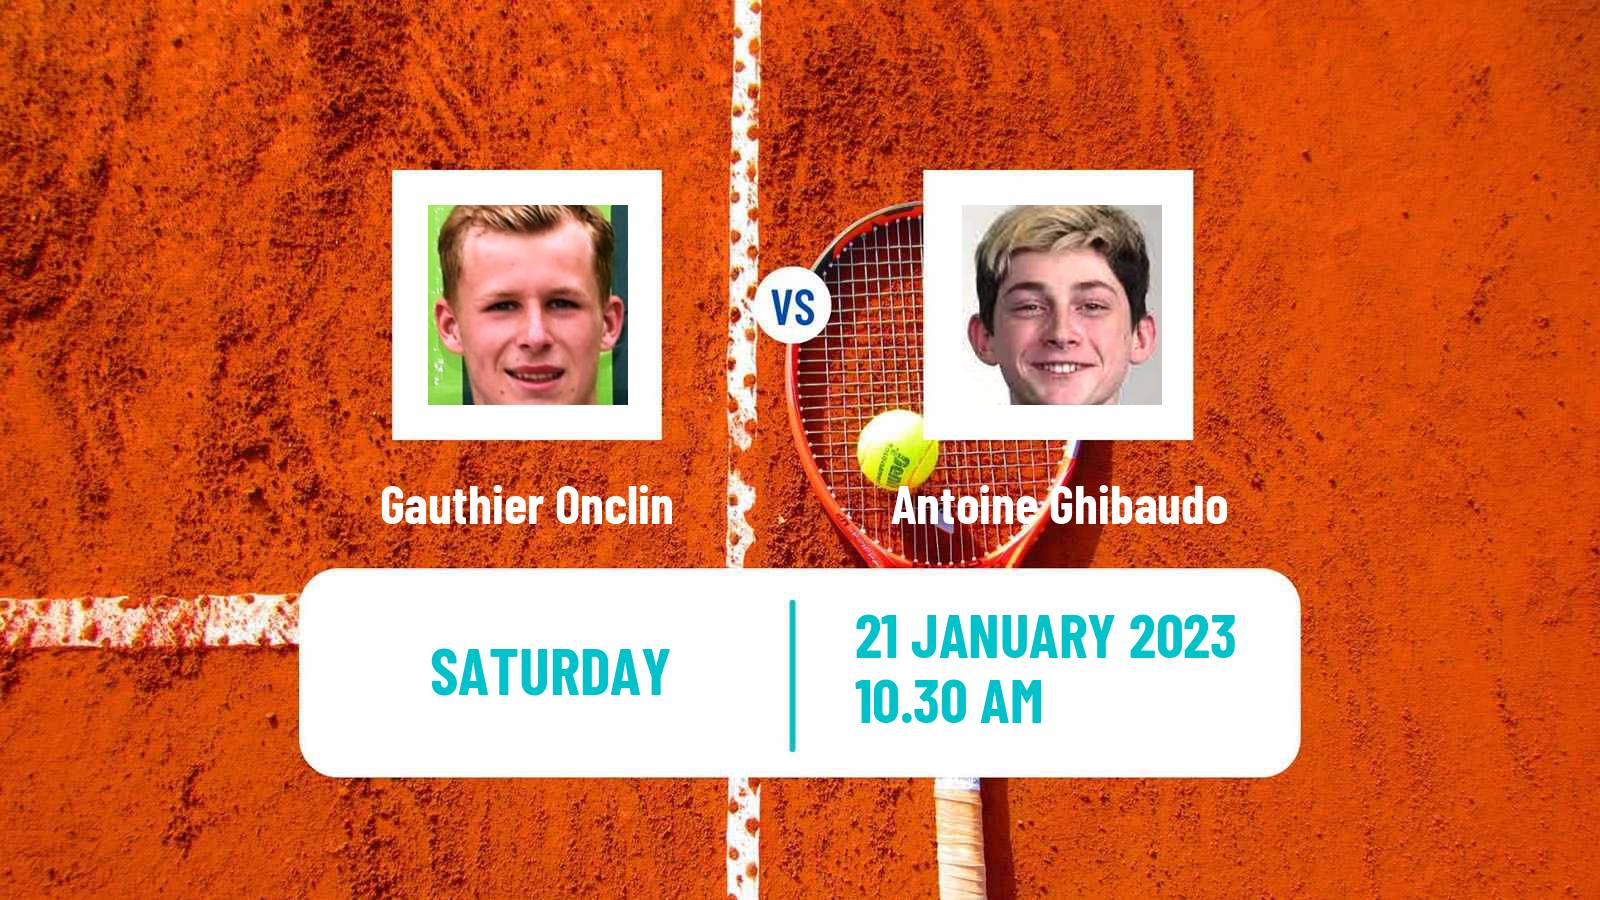 Tennis ITF Tournaments Gauthier Onclin - Antoine Ghibaudo